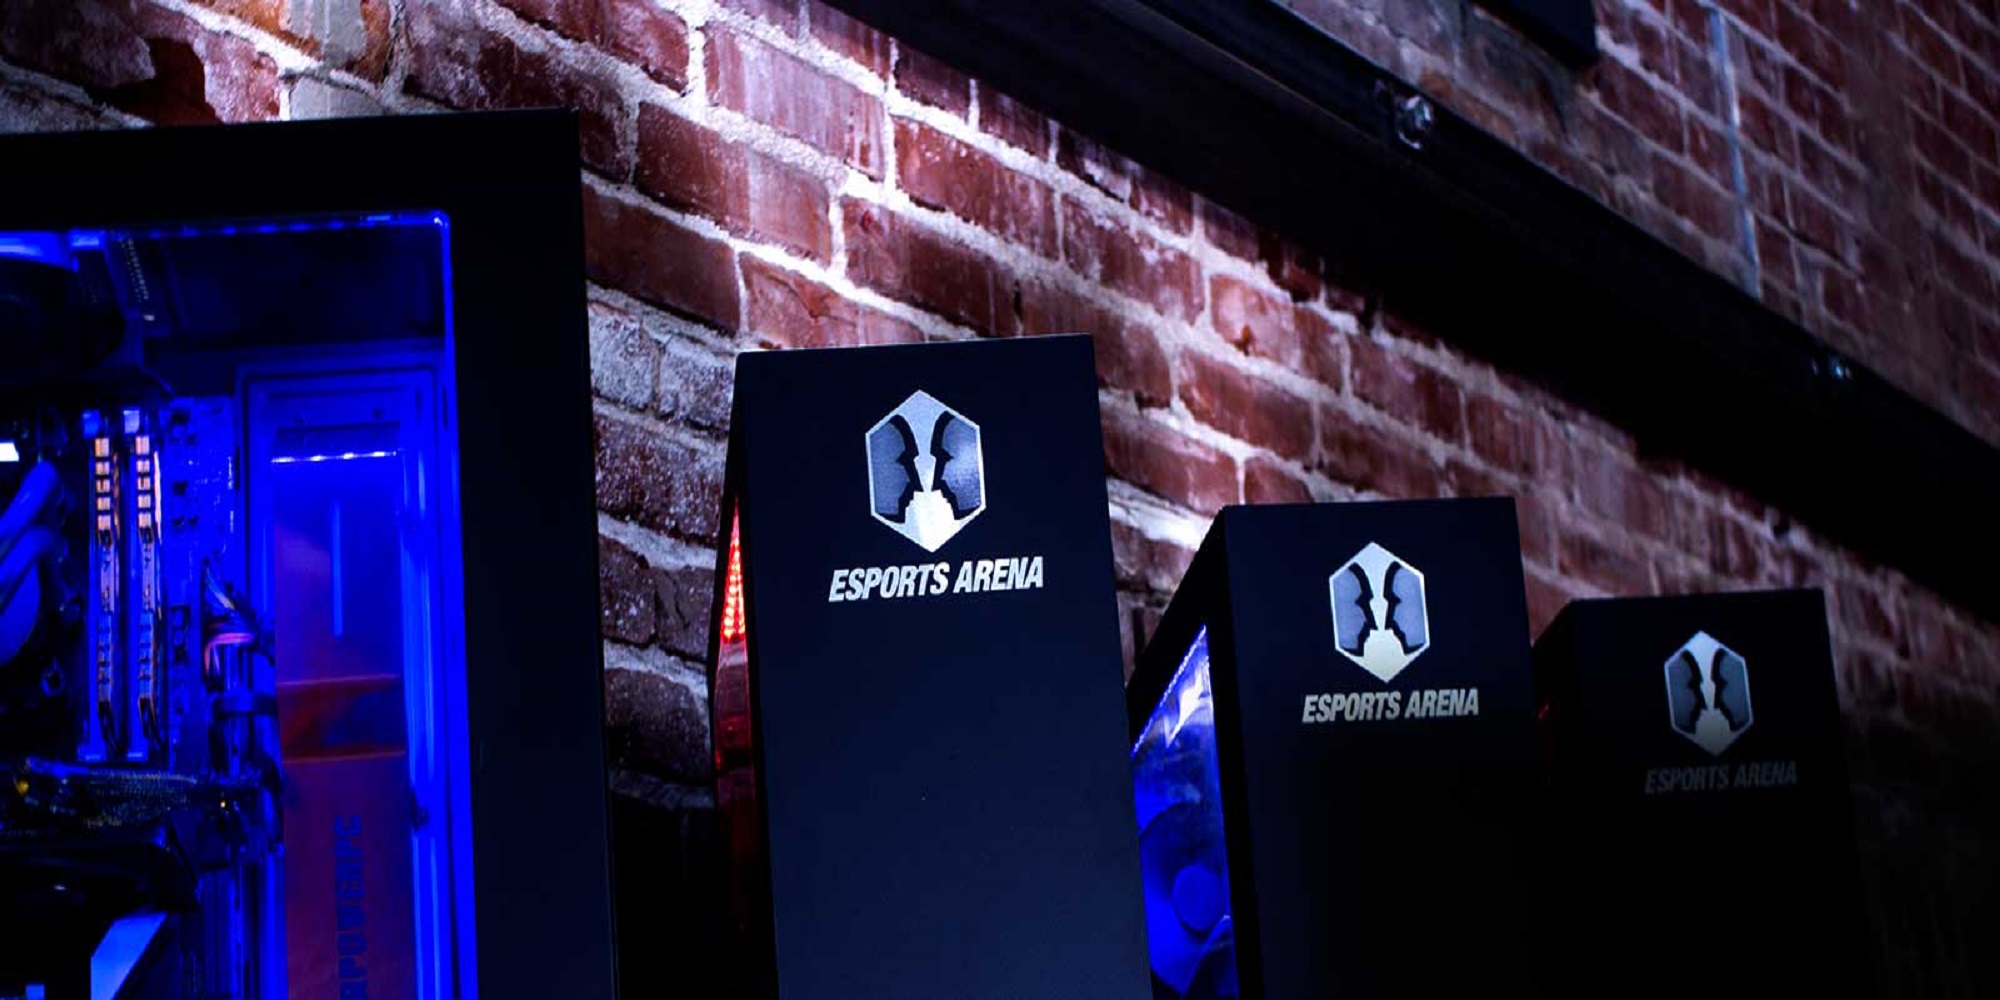 ESports Arena: Syber’s Role with America’s First ESports Foundation